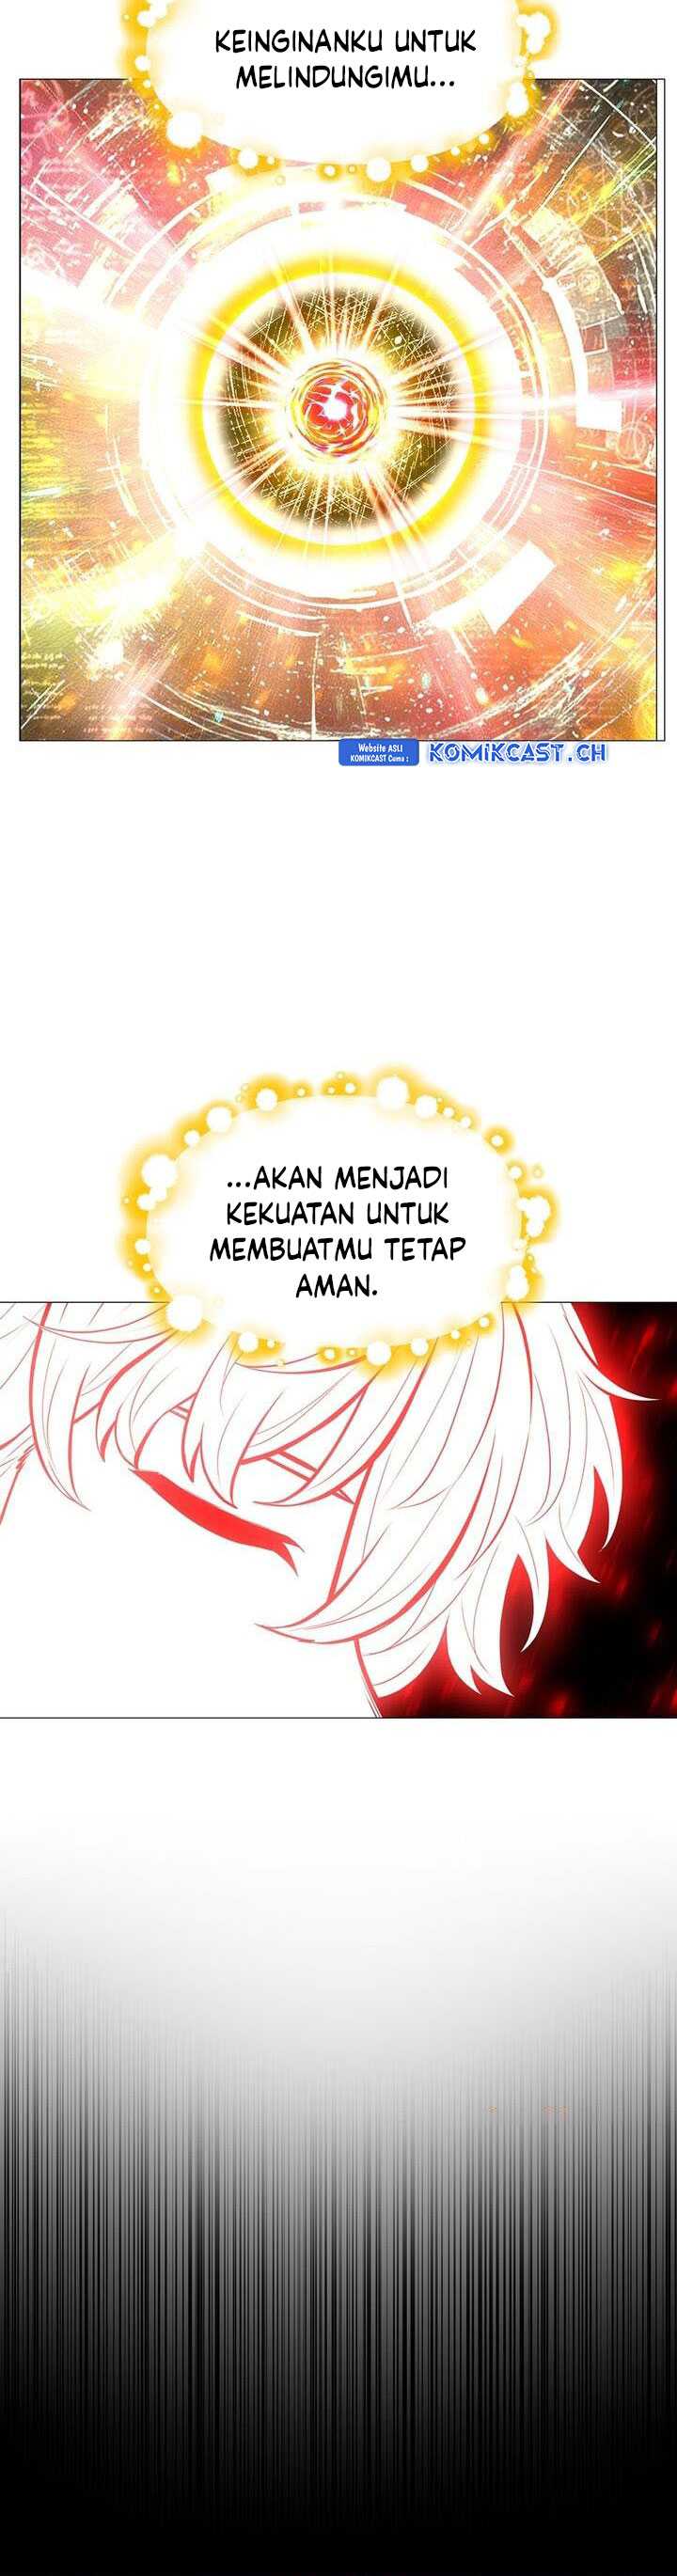 Updater Chapter 130